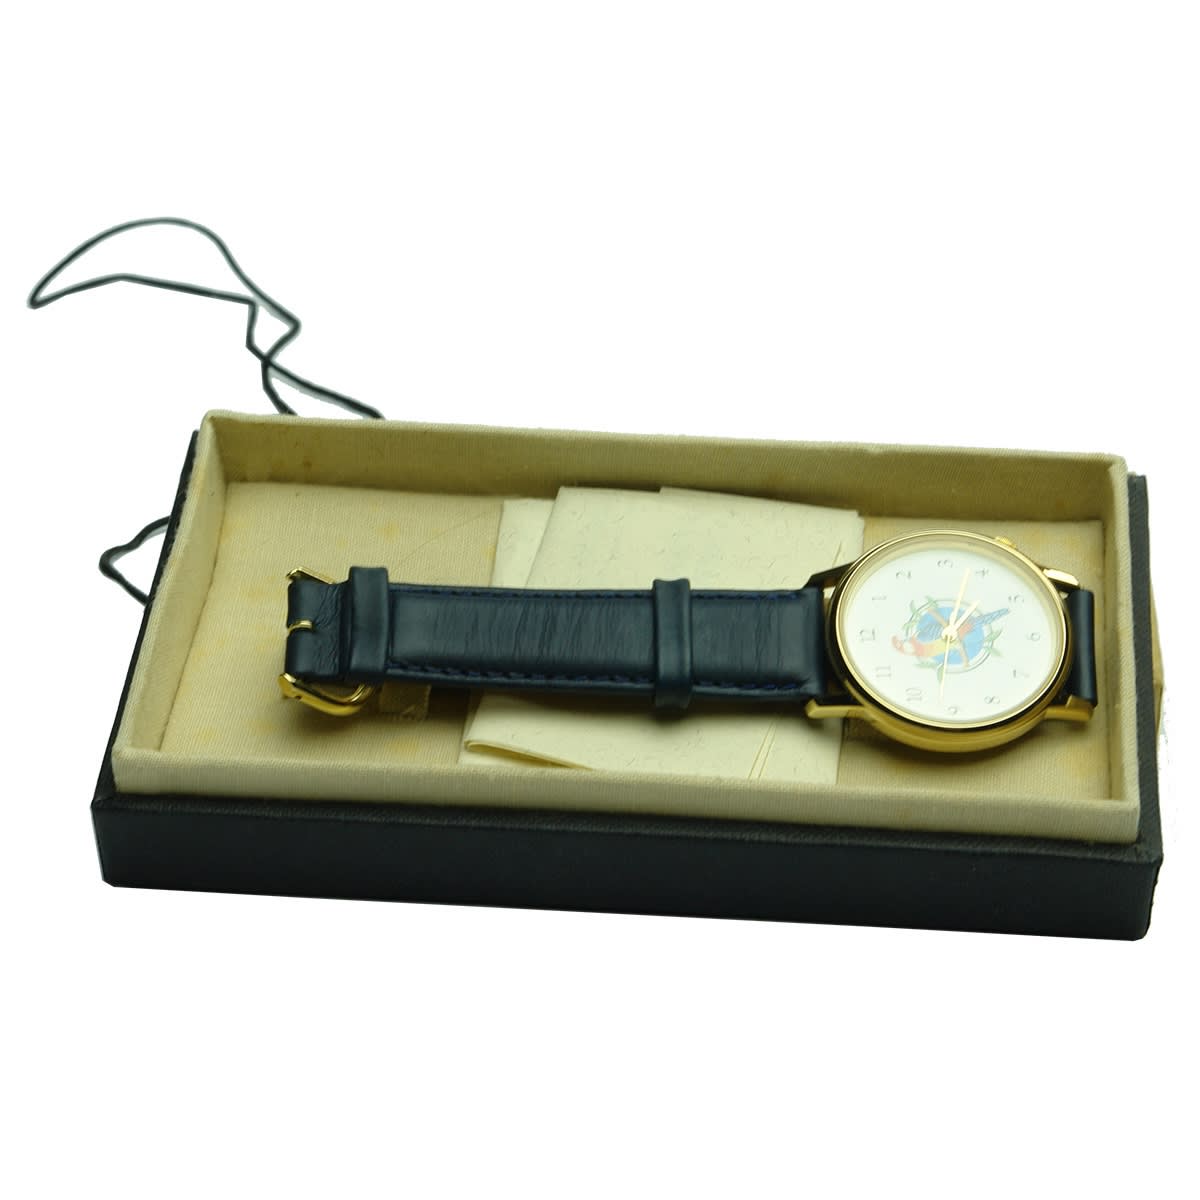 Promotional Watch. Rosella. Corporate Accessories. Note inside with Rosella branding on the front about refunds.